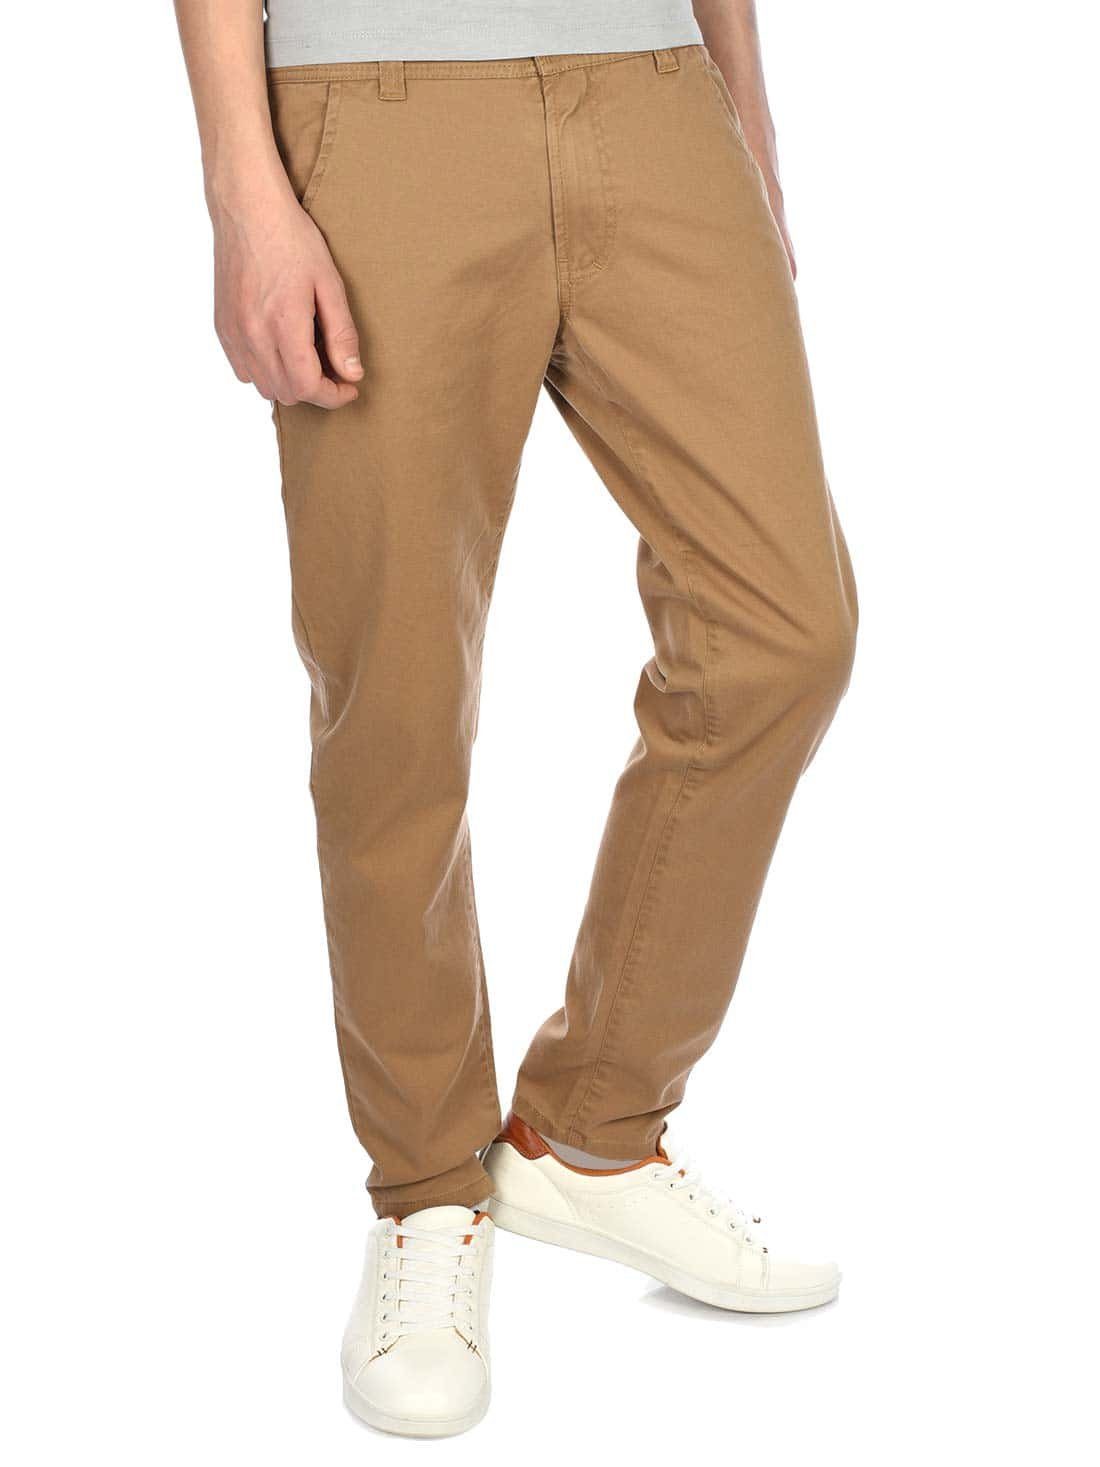 BEZLIT Chinohose Jungen casual (1-tlg) Chino Hose Beige